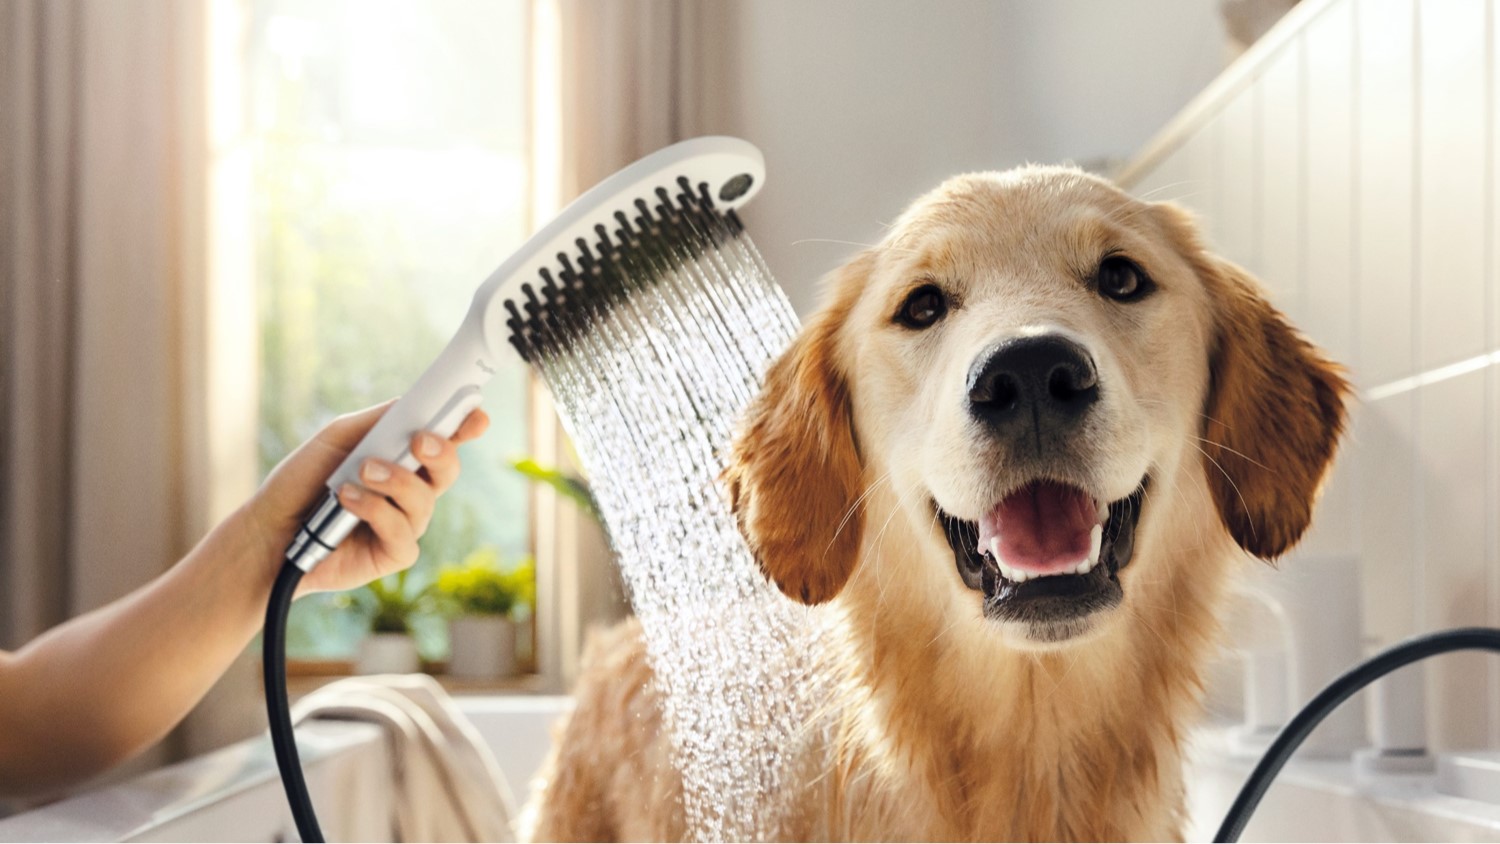 Introducing hansgrohe’s DogShower – a hand-held shower specifically designed for man’s best friend! @UK_Bathrooms